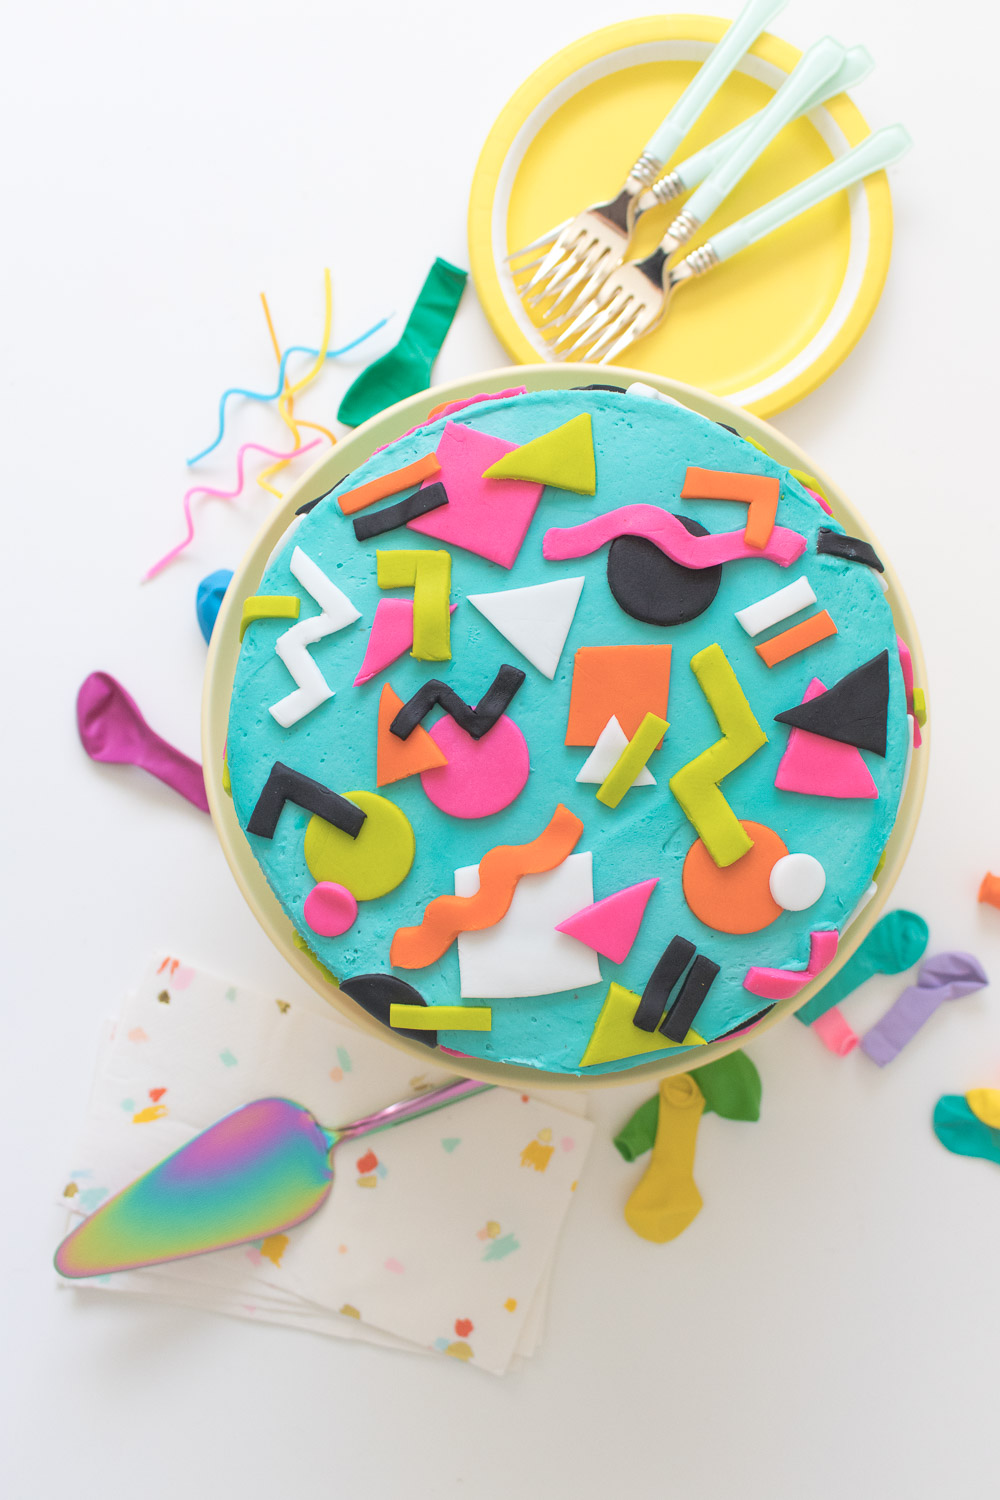 90s Throwback Layer Cake | Club Crafted